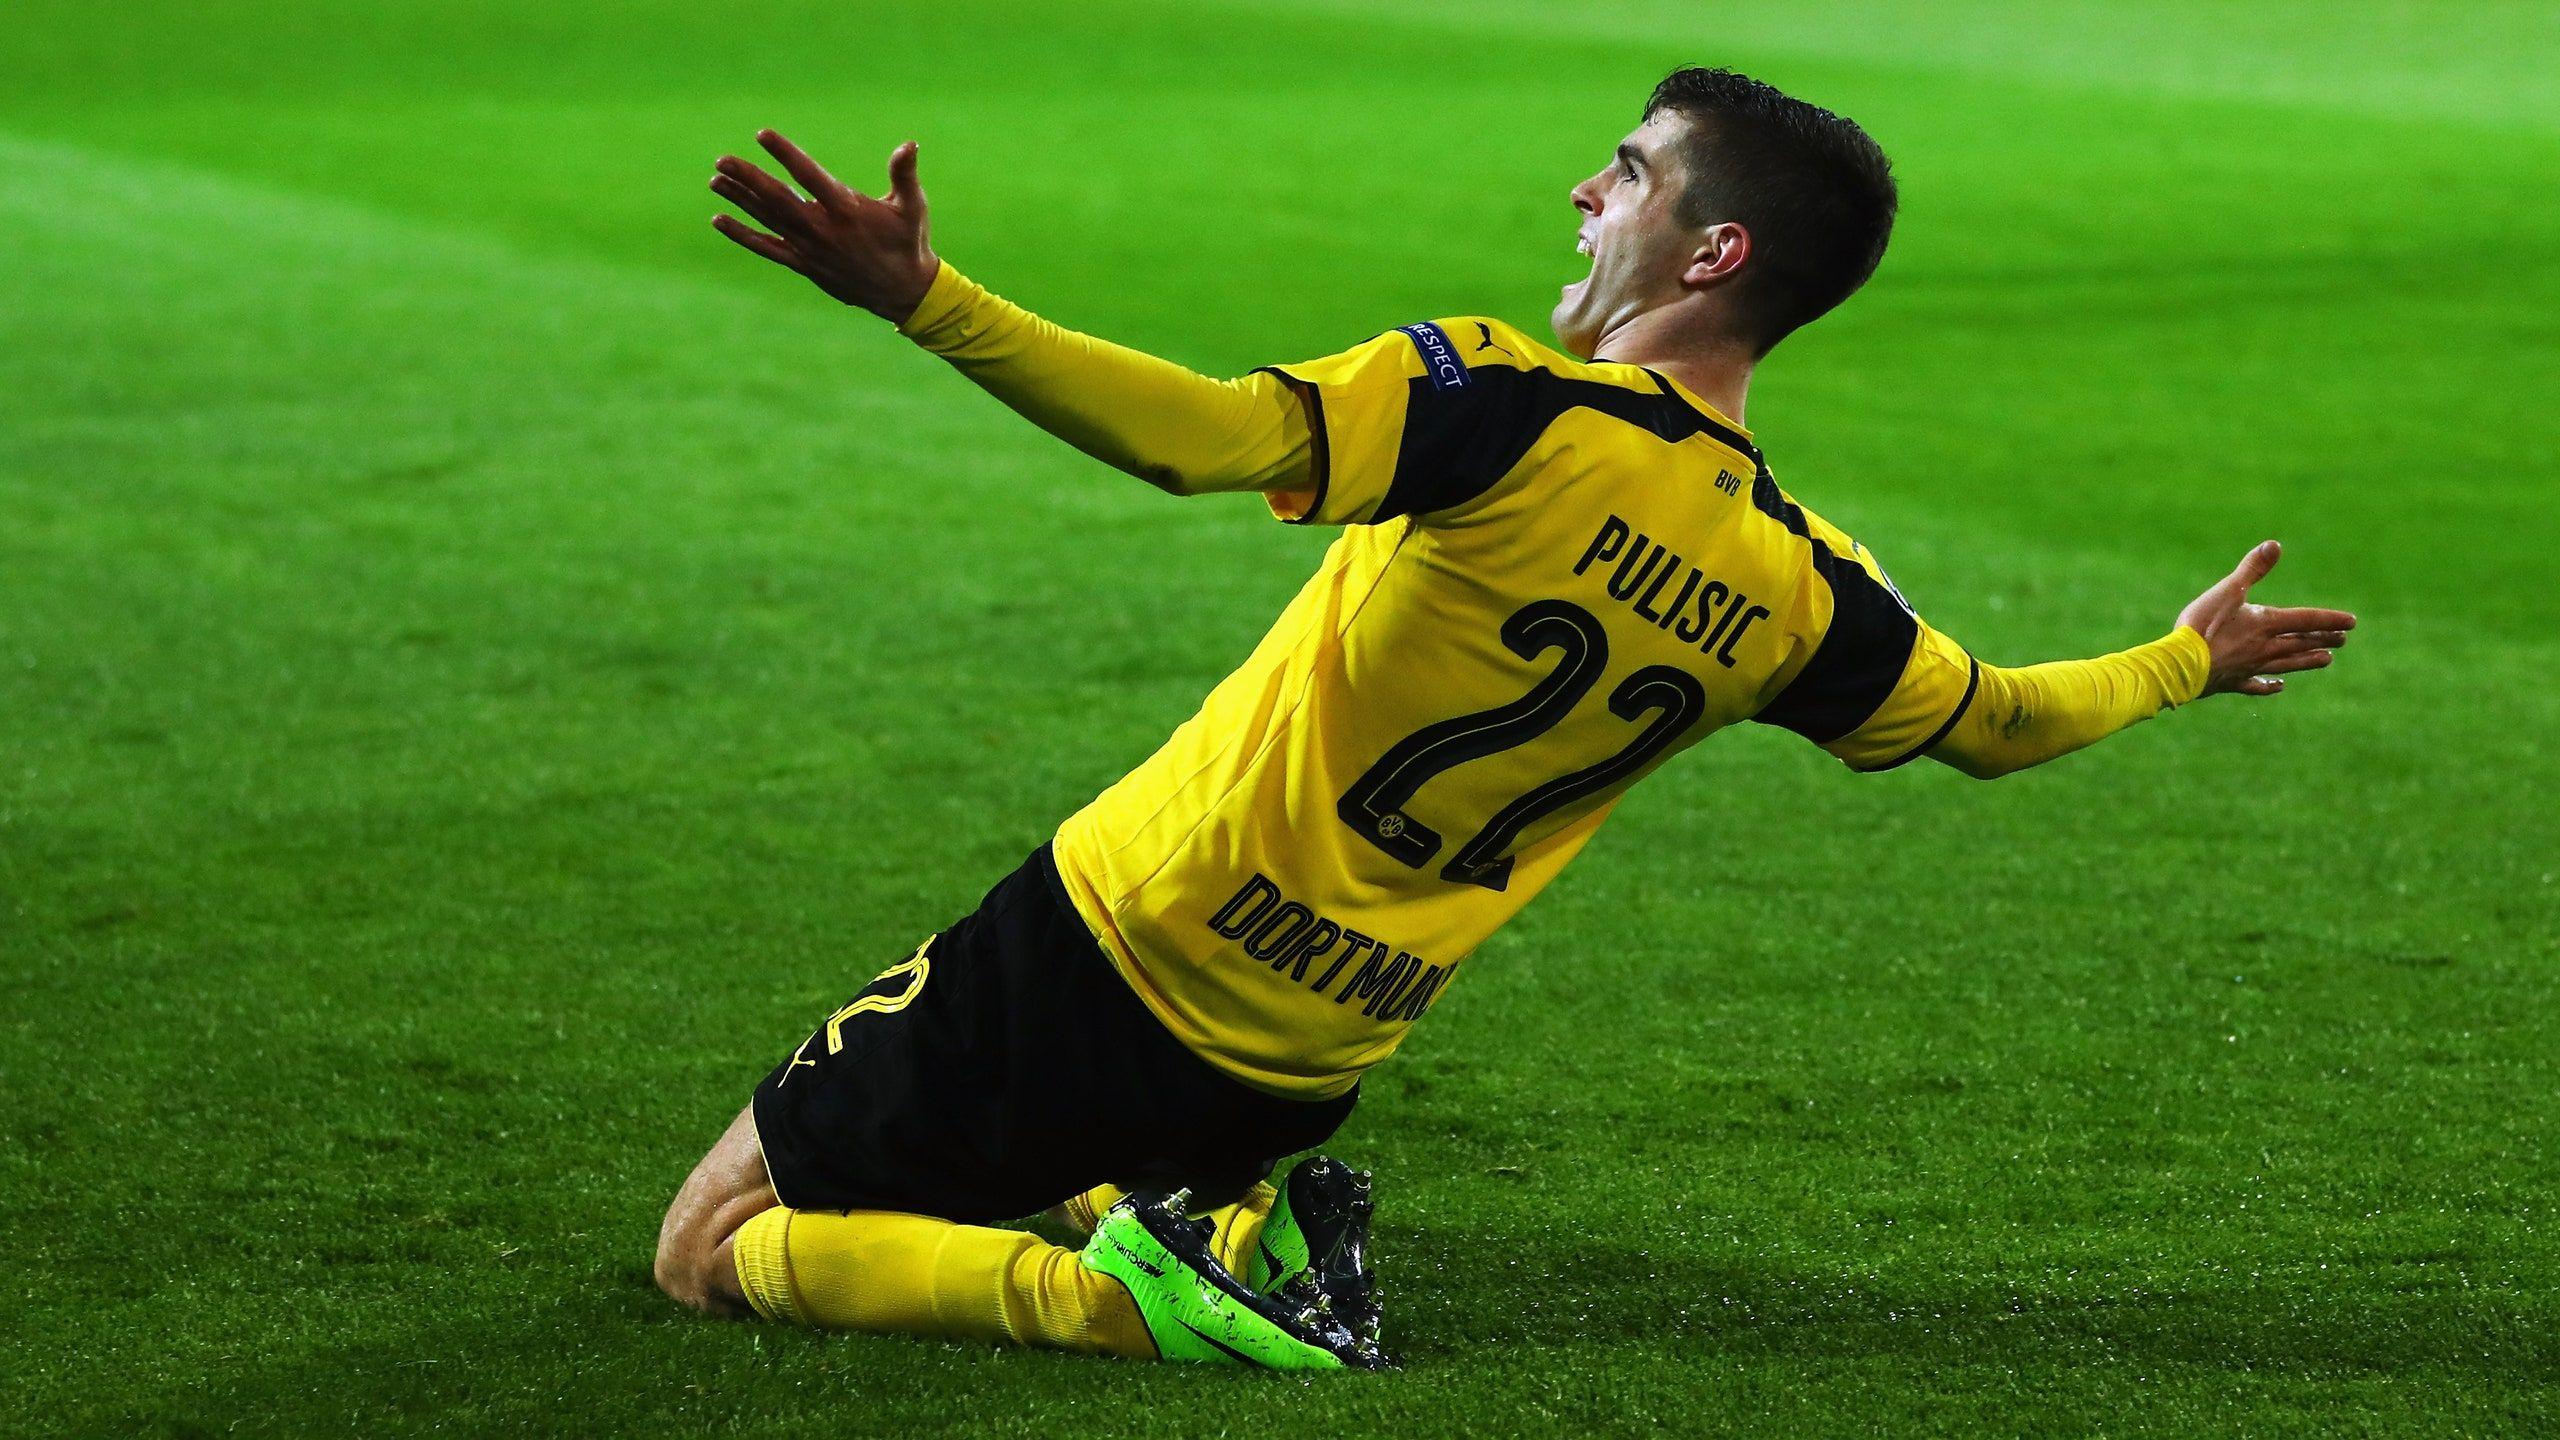 Christian Pulisic Wallpapers - Top Free Christian Pulisic Backgrounds